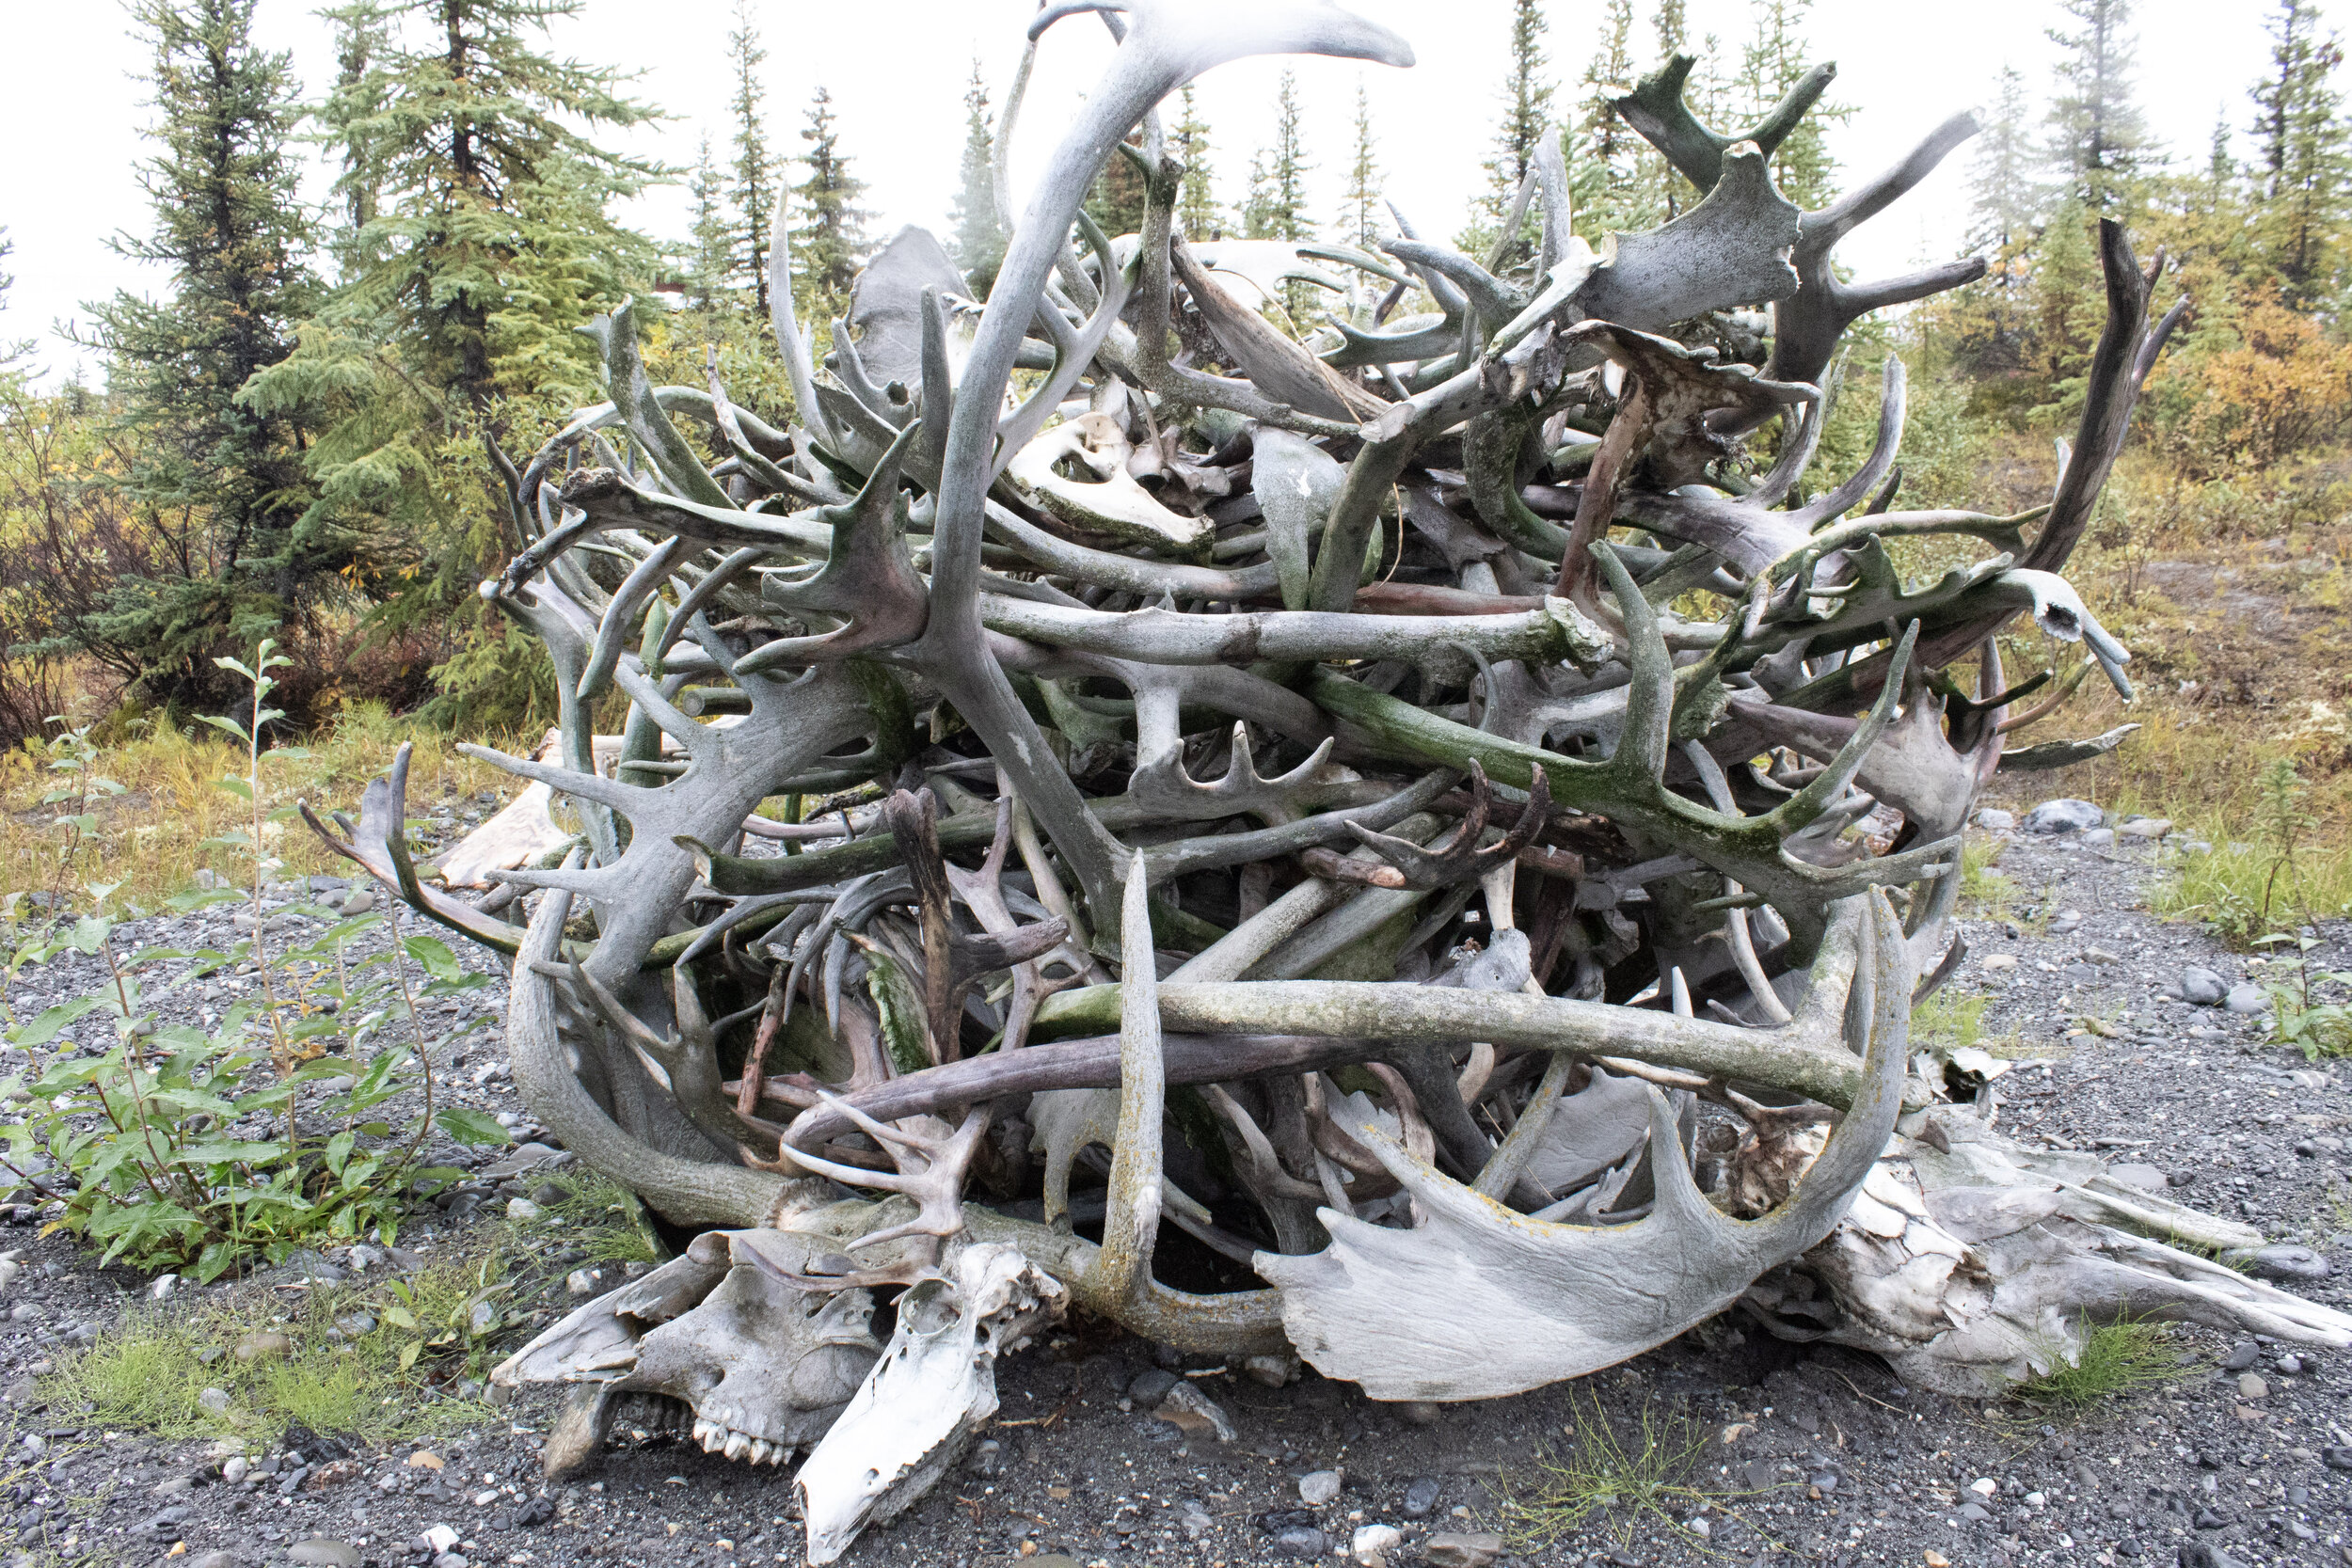 Antler pile with caribou antlers, moose paddles, and some skulls, too.